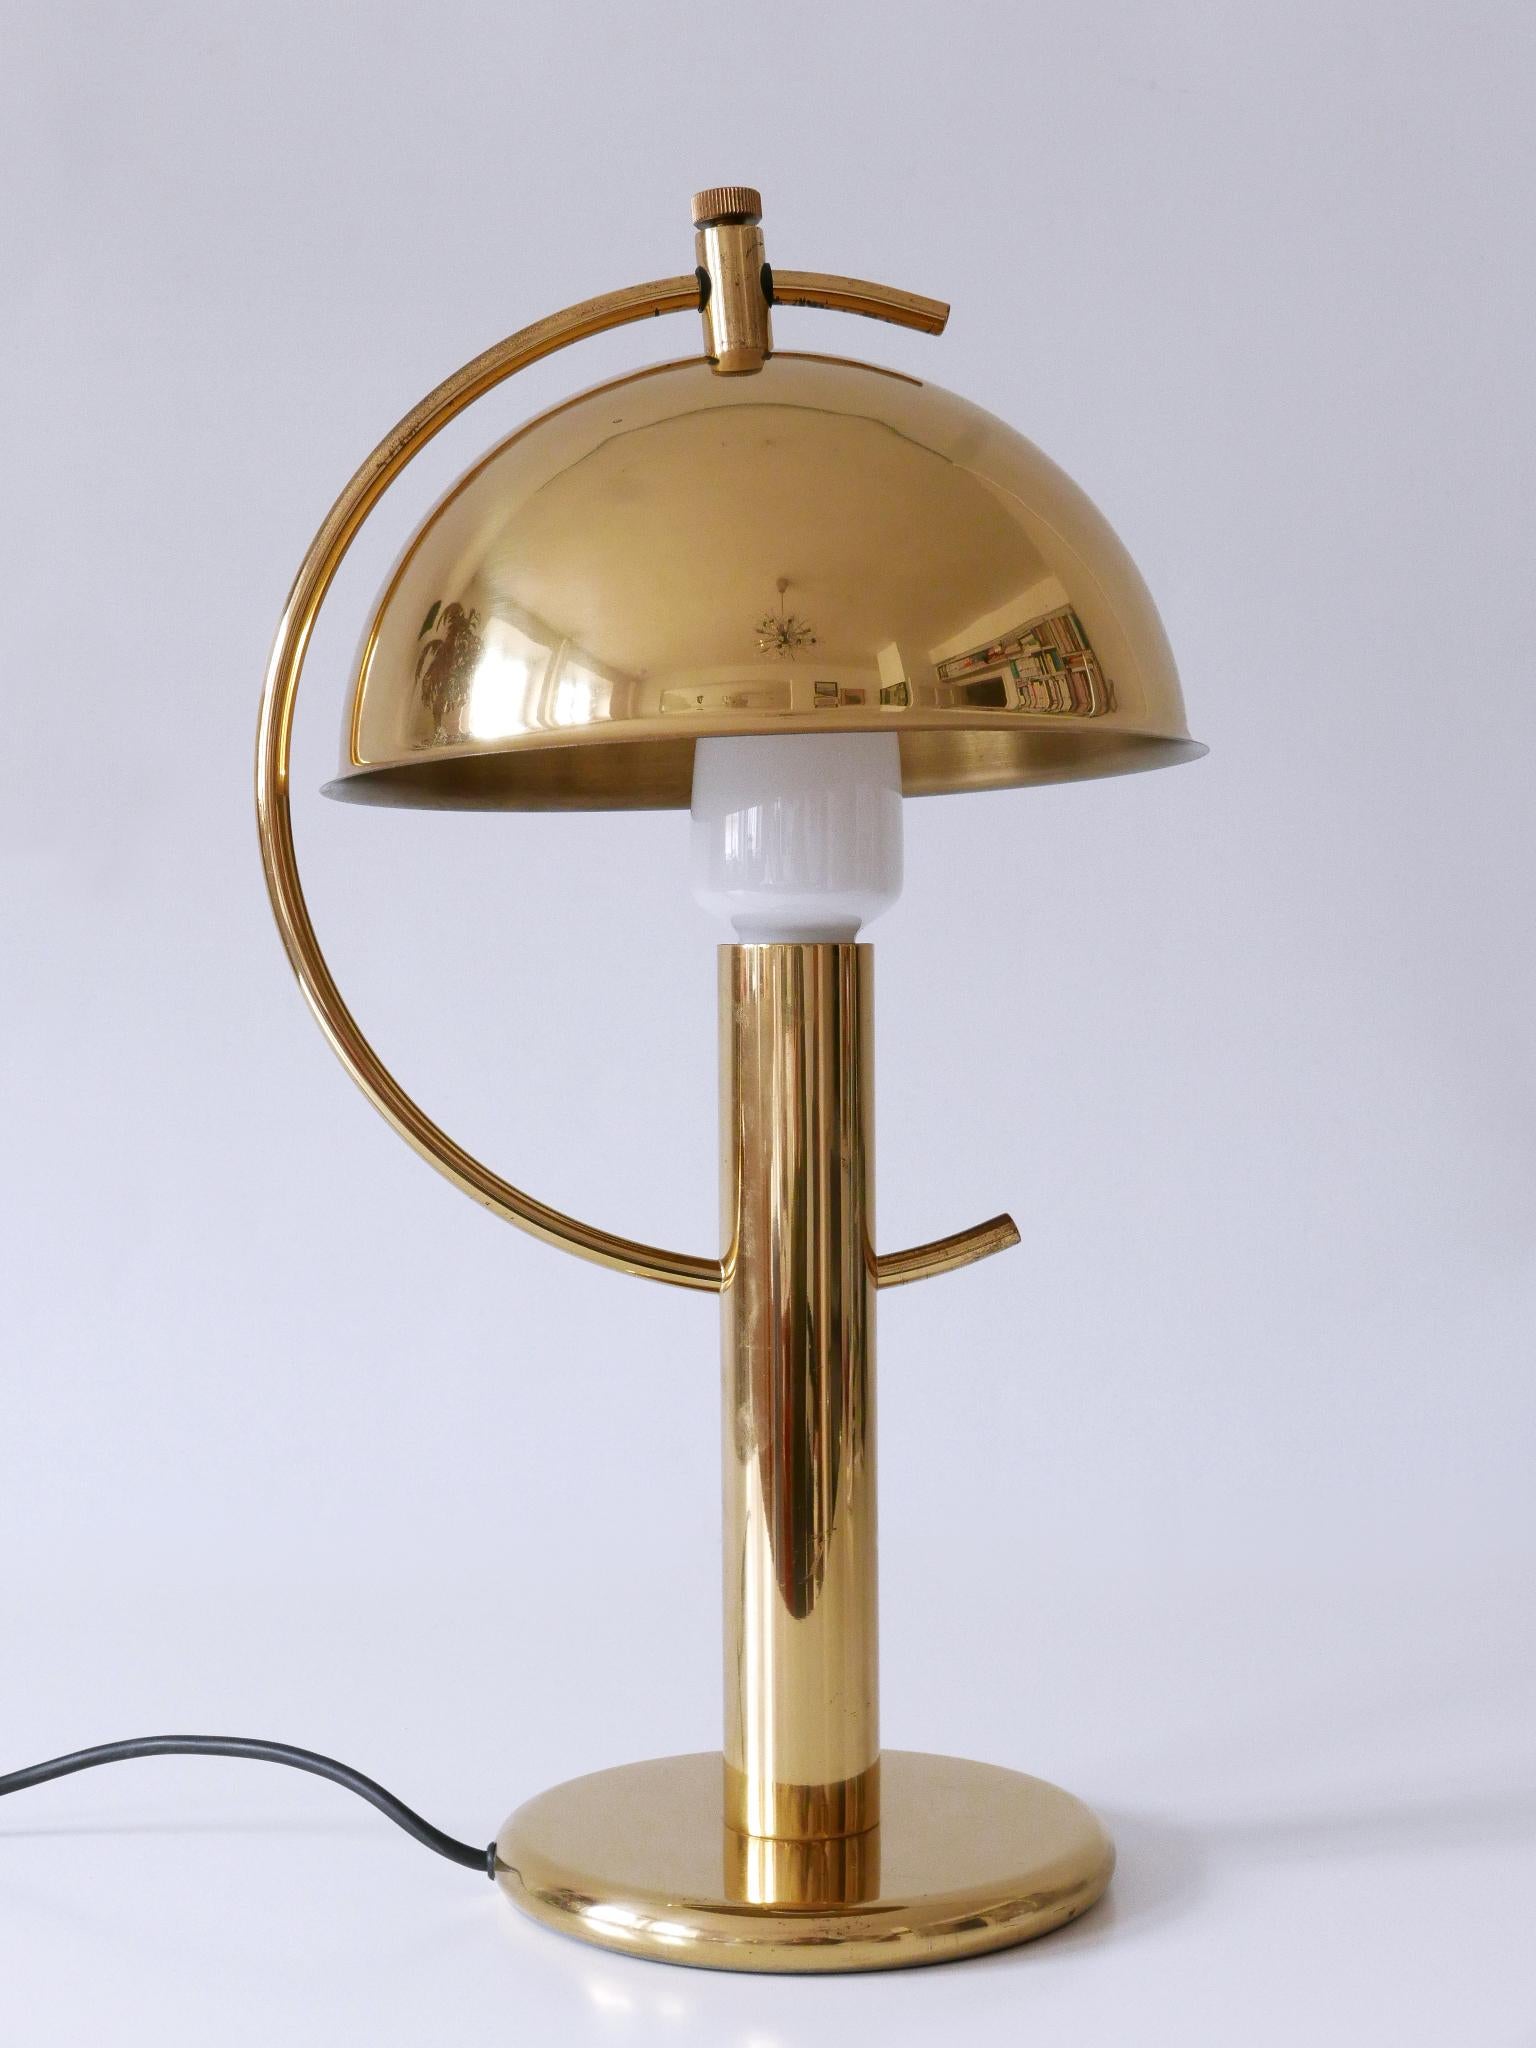 Exceptional Mid-Century Modern Brass Table Lamp by Gebrüder Cosack Germany 1960s In Good Condition For Sale In Munich, DE